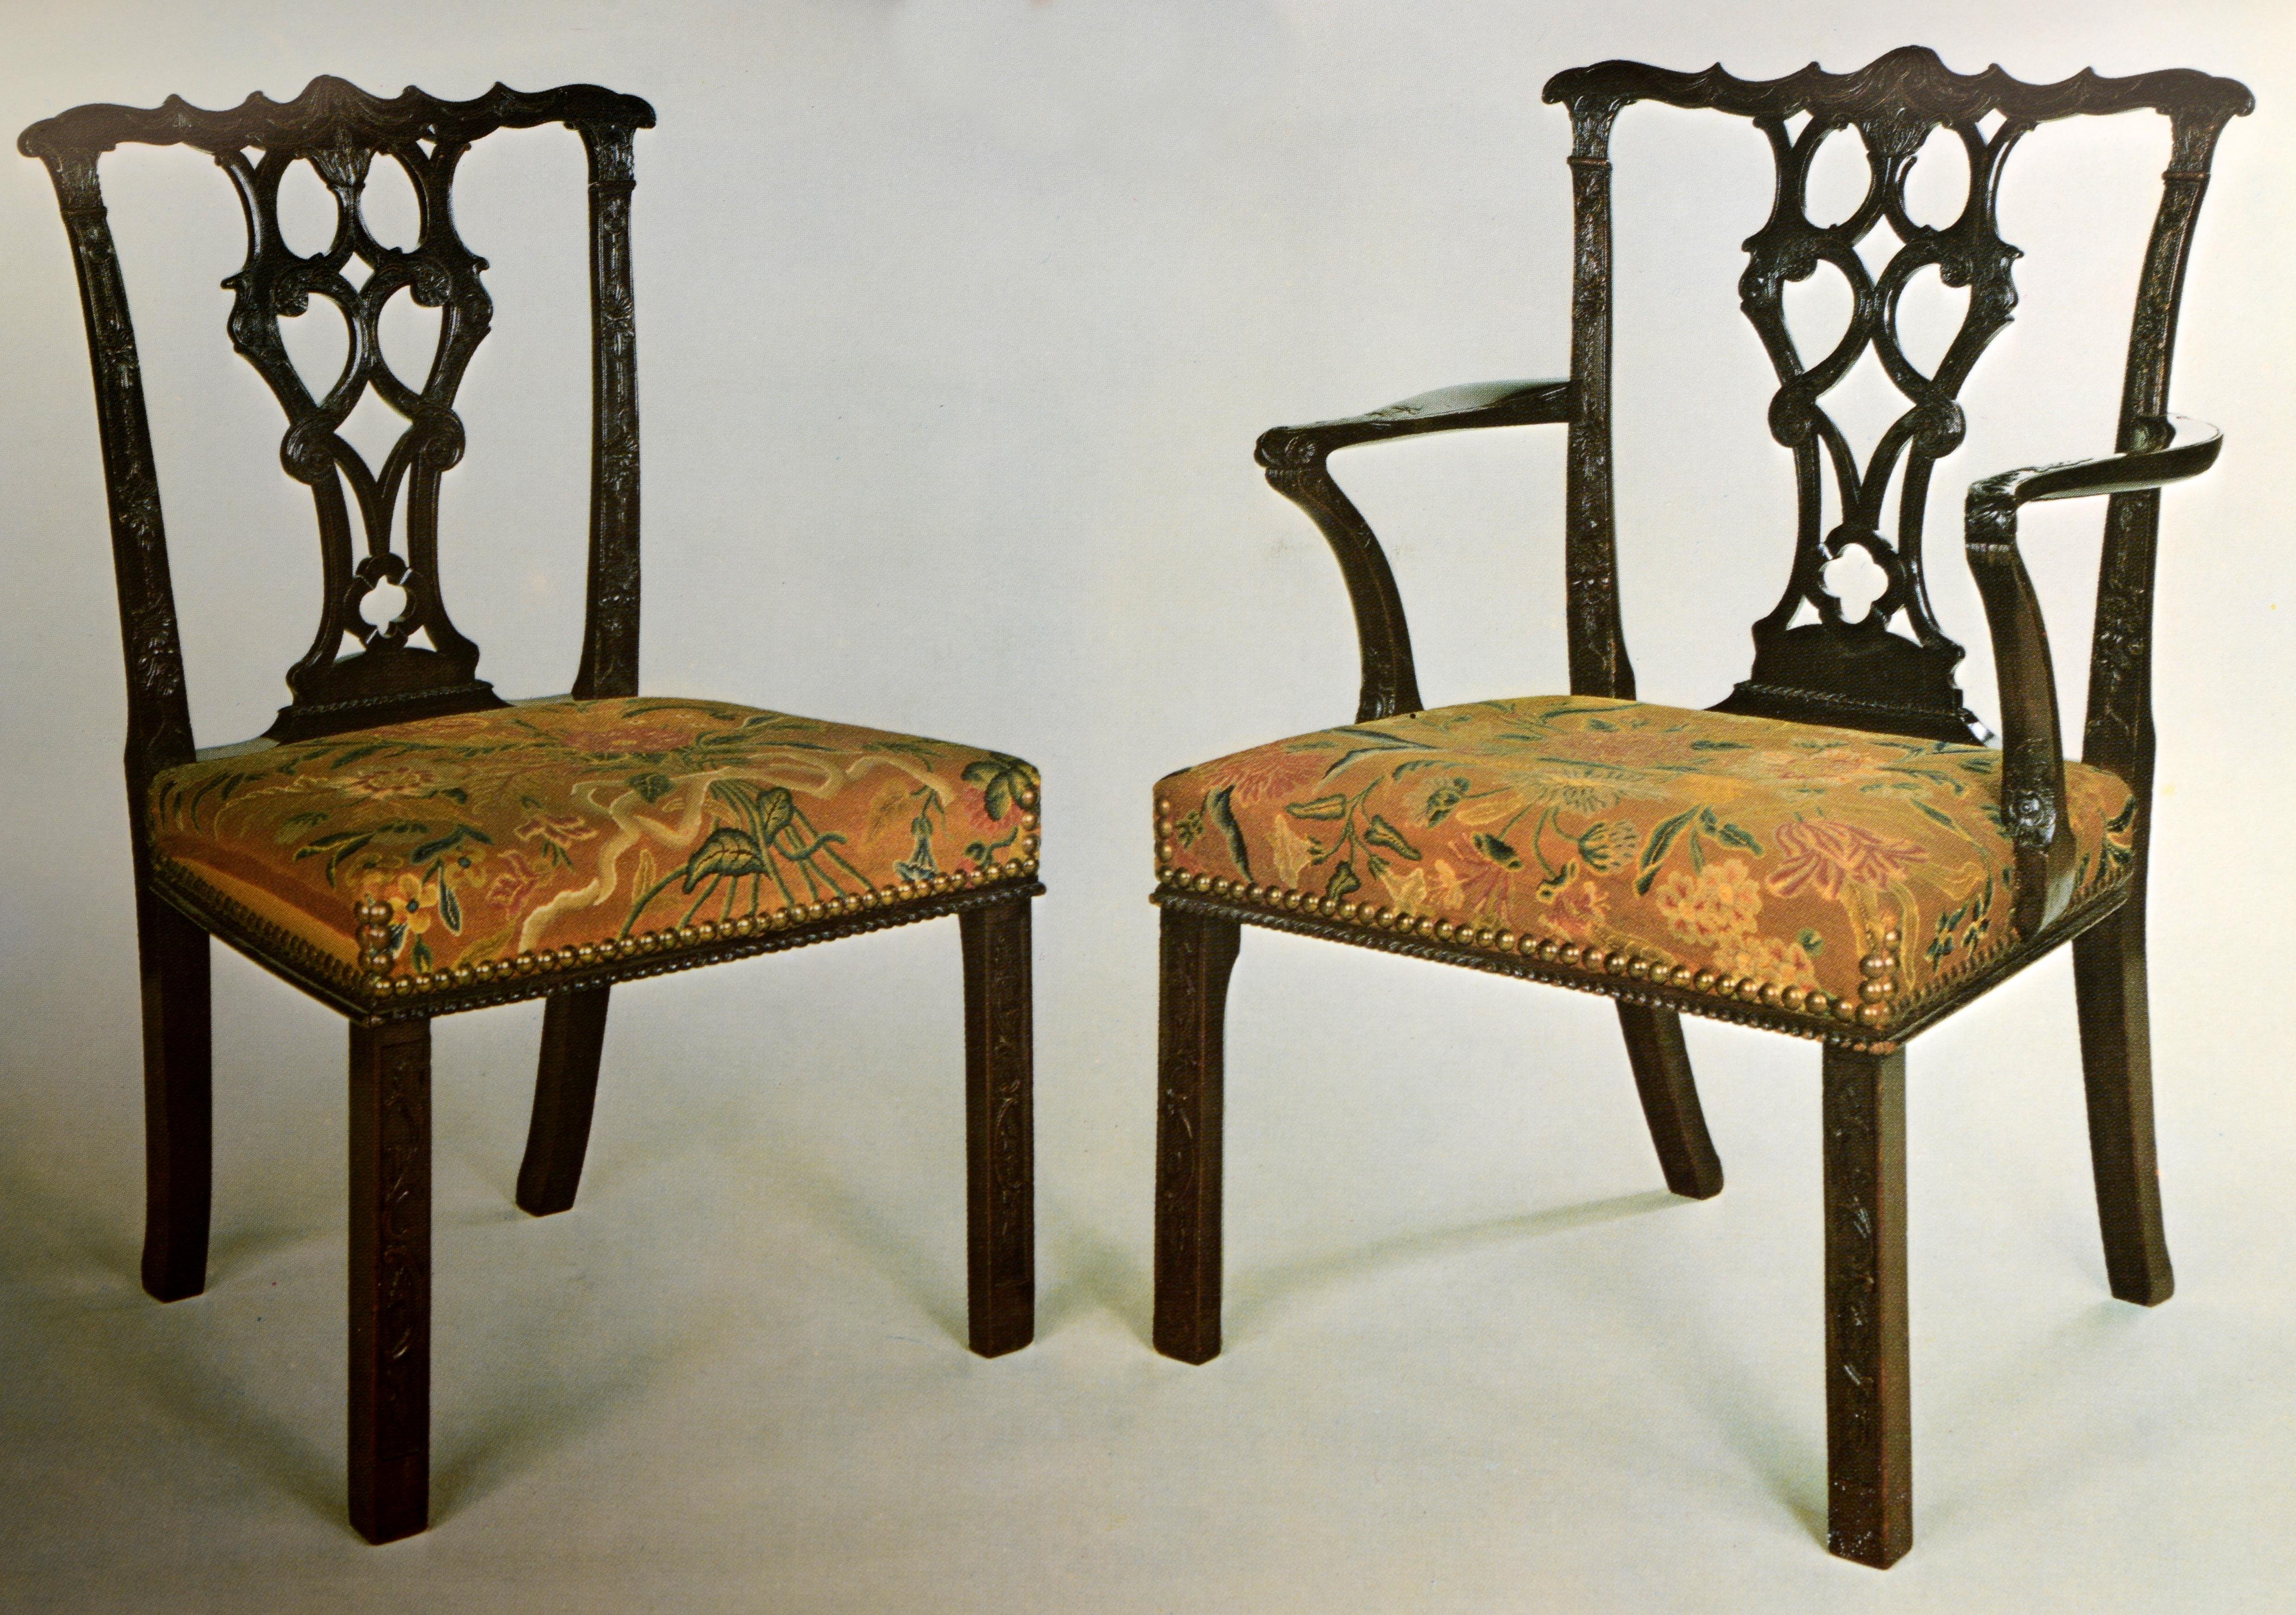 Christie's Part I & II, Childwick Bury, Objects, Fine French & English Furniture For Sale 12